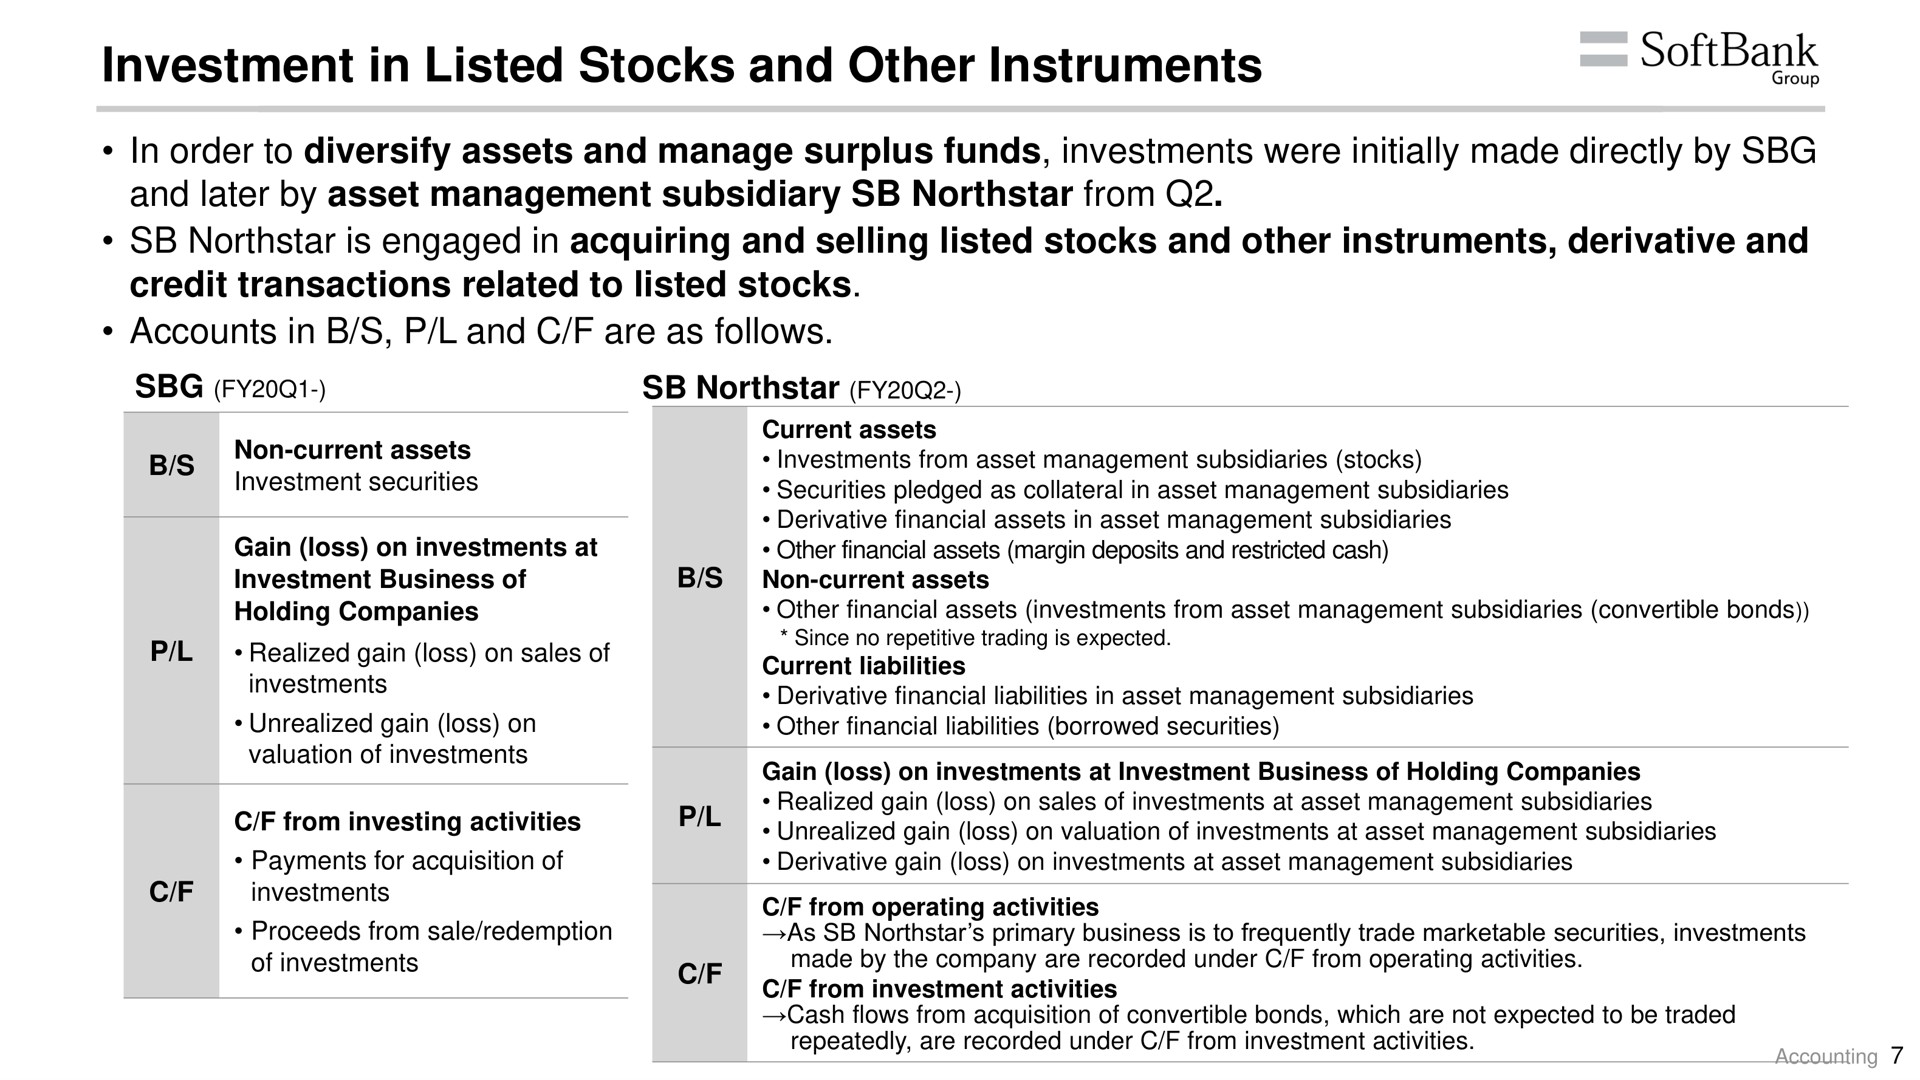 investment in listed stocks and other instruments | SoftBank